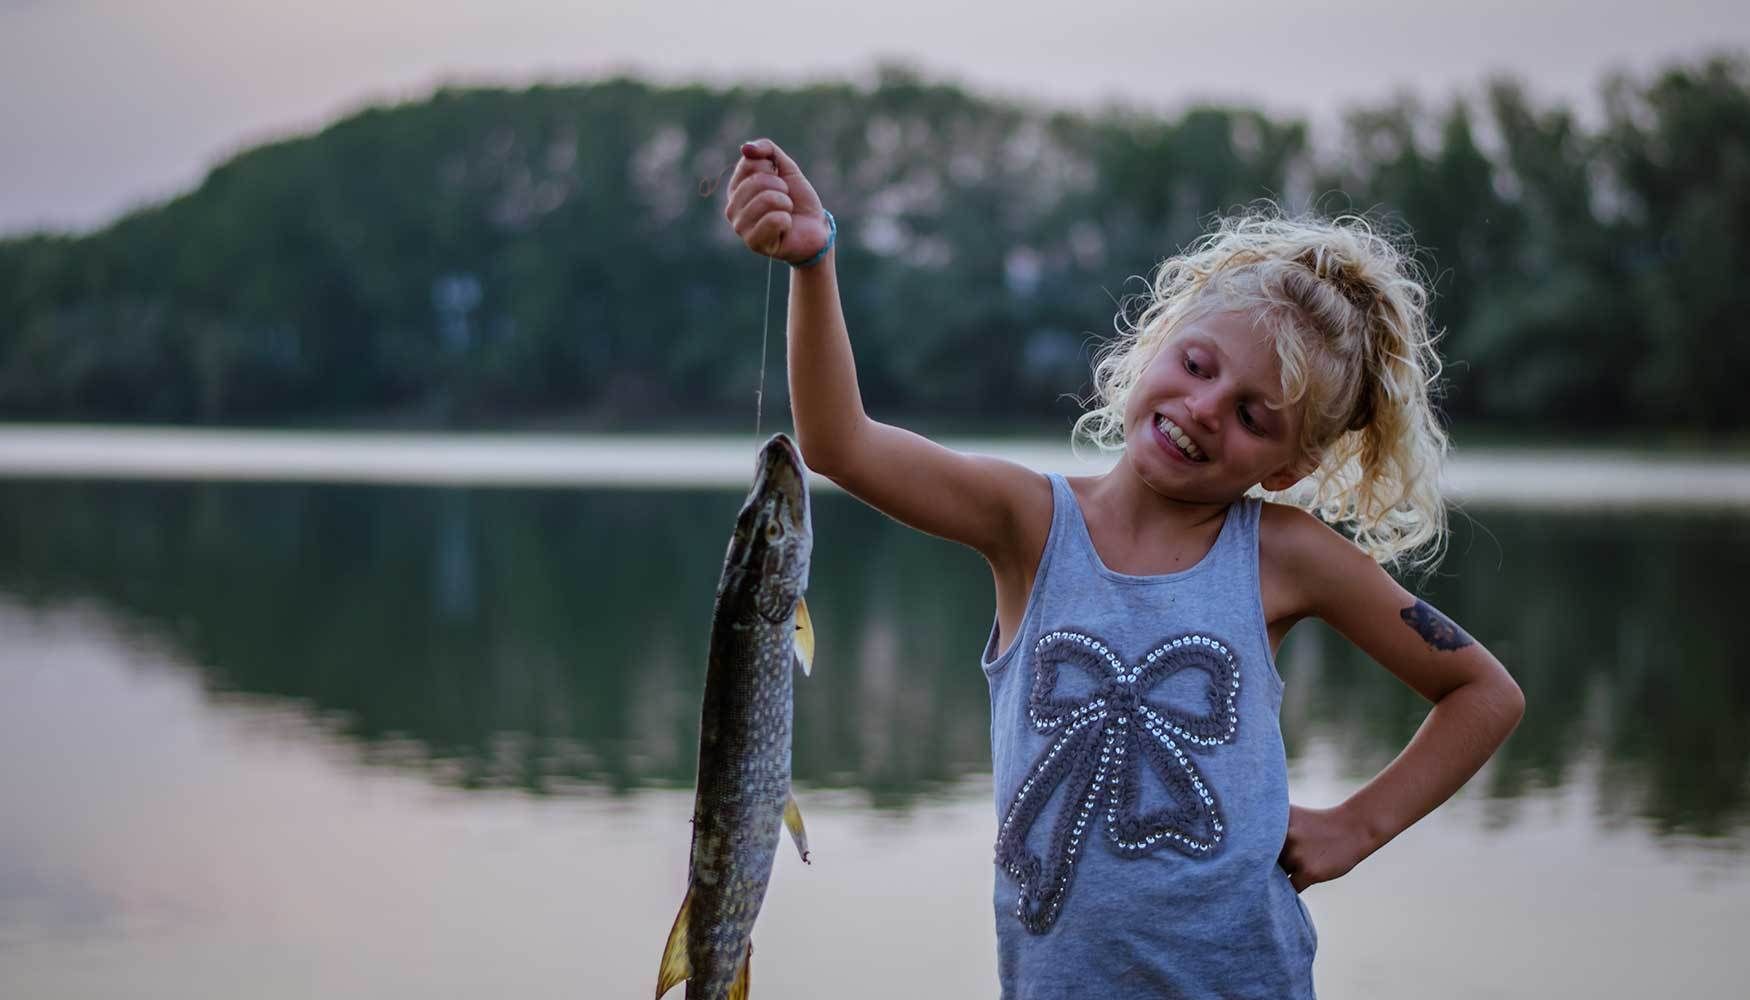 Girl smiling at the fish she is holding.